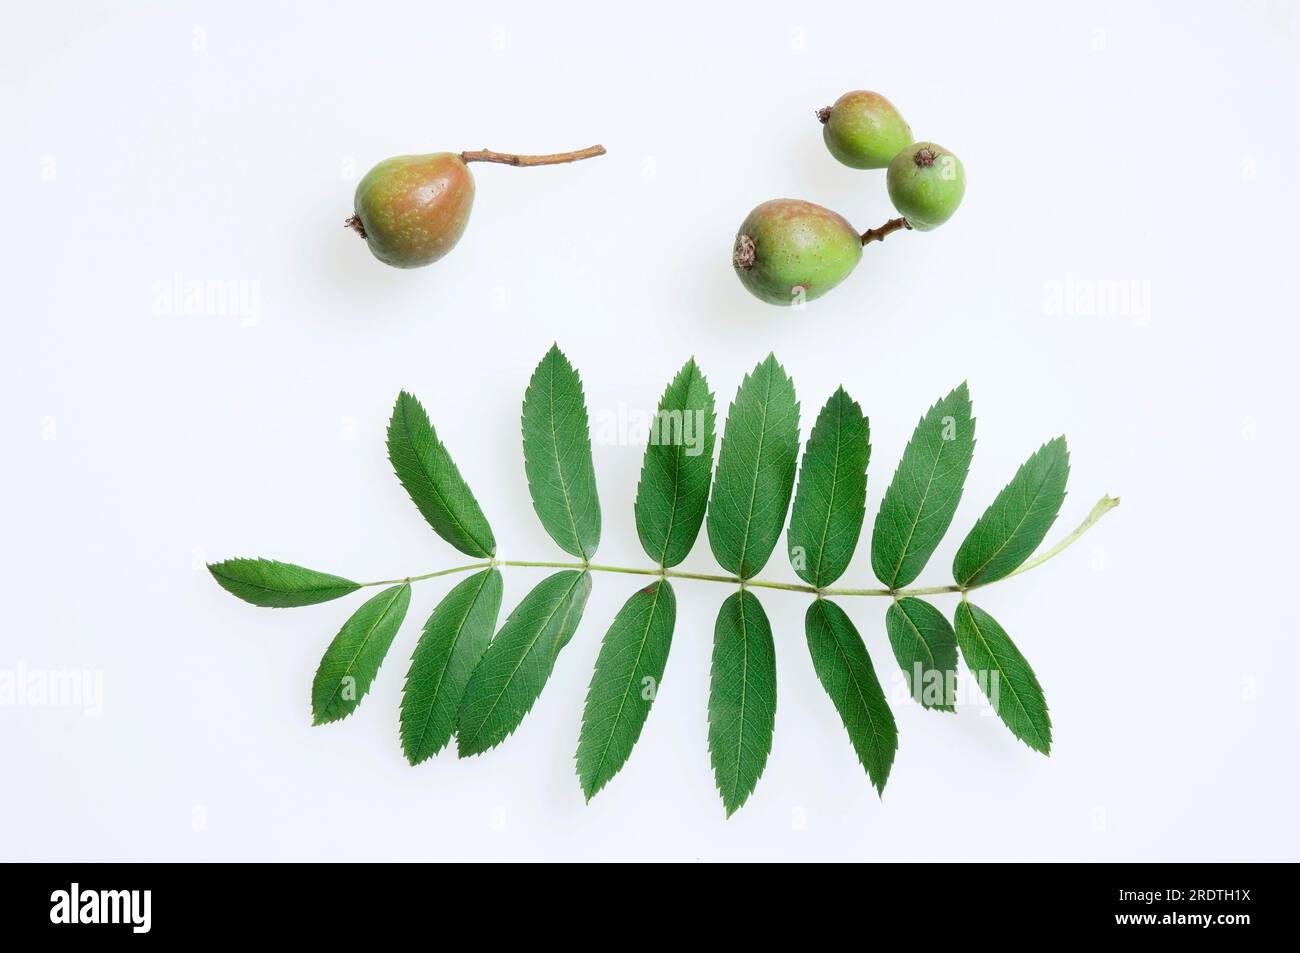 Service Tree (Sorbus domestica), fruits and leaf, Chequeree Stock Photo